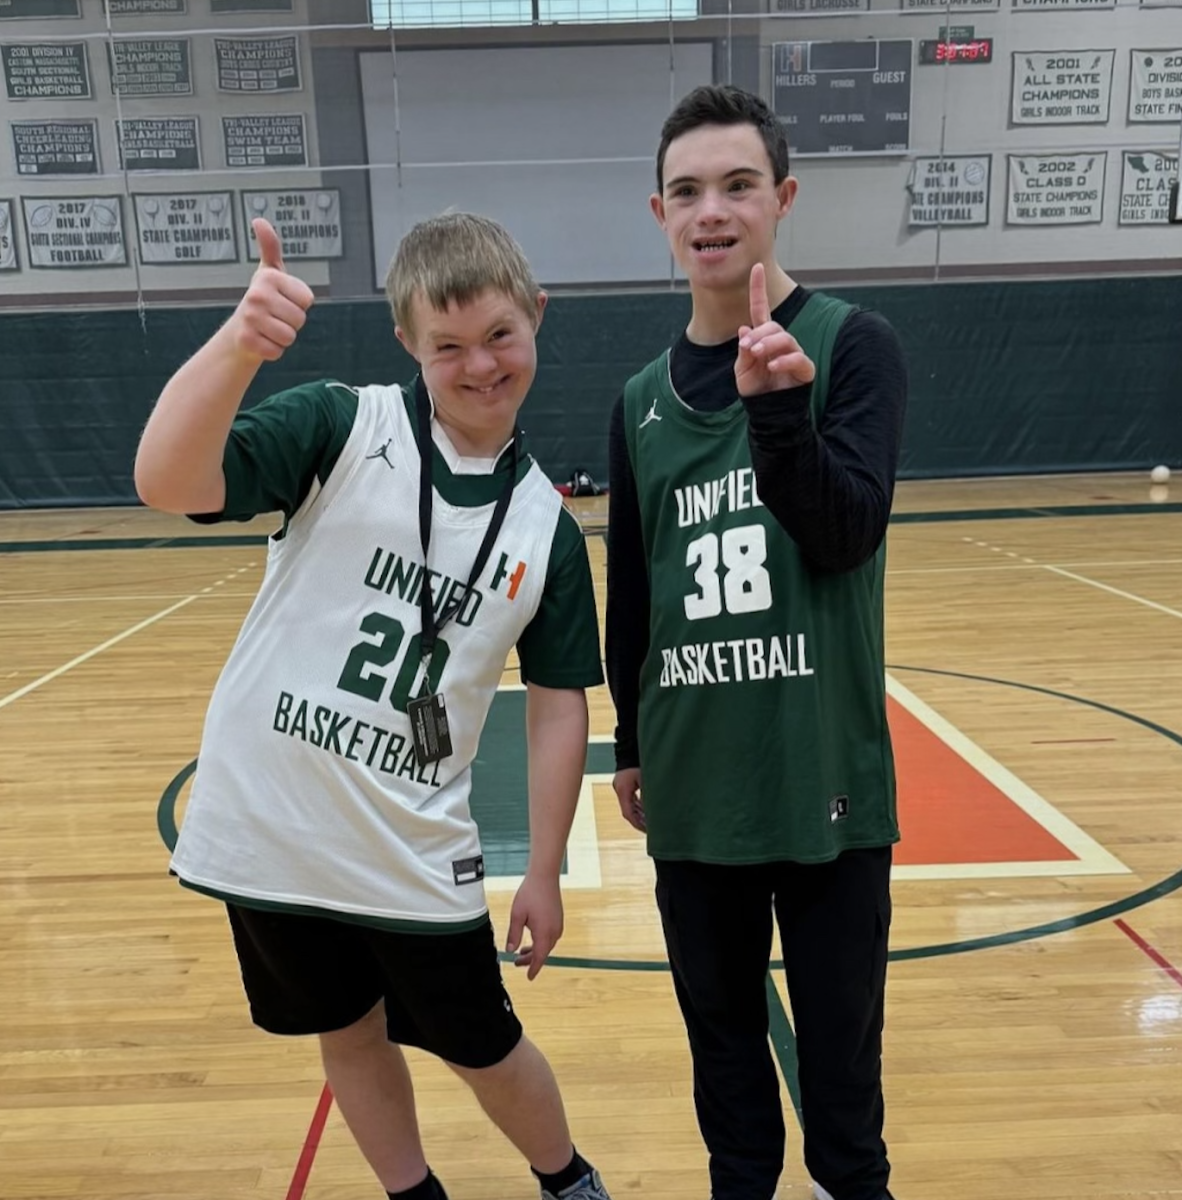 Photo credits: Chip Collins
Players John Murray (left) and Jacob Murasko (right) having fun at practice after school!